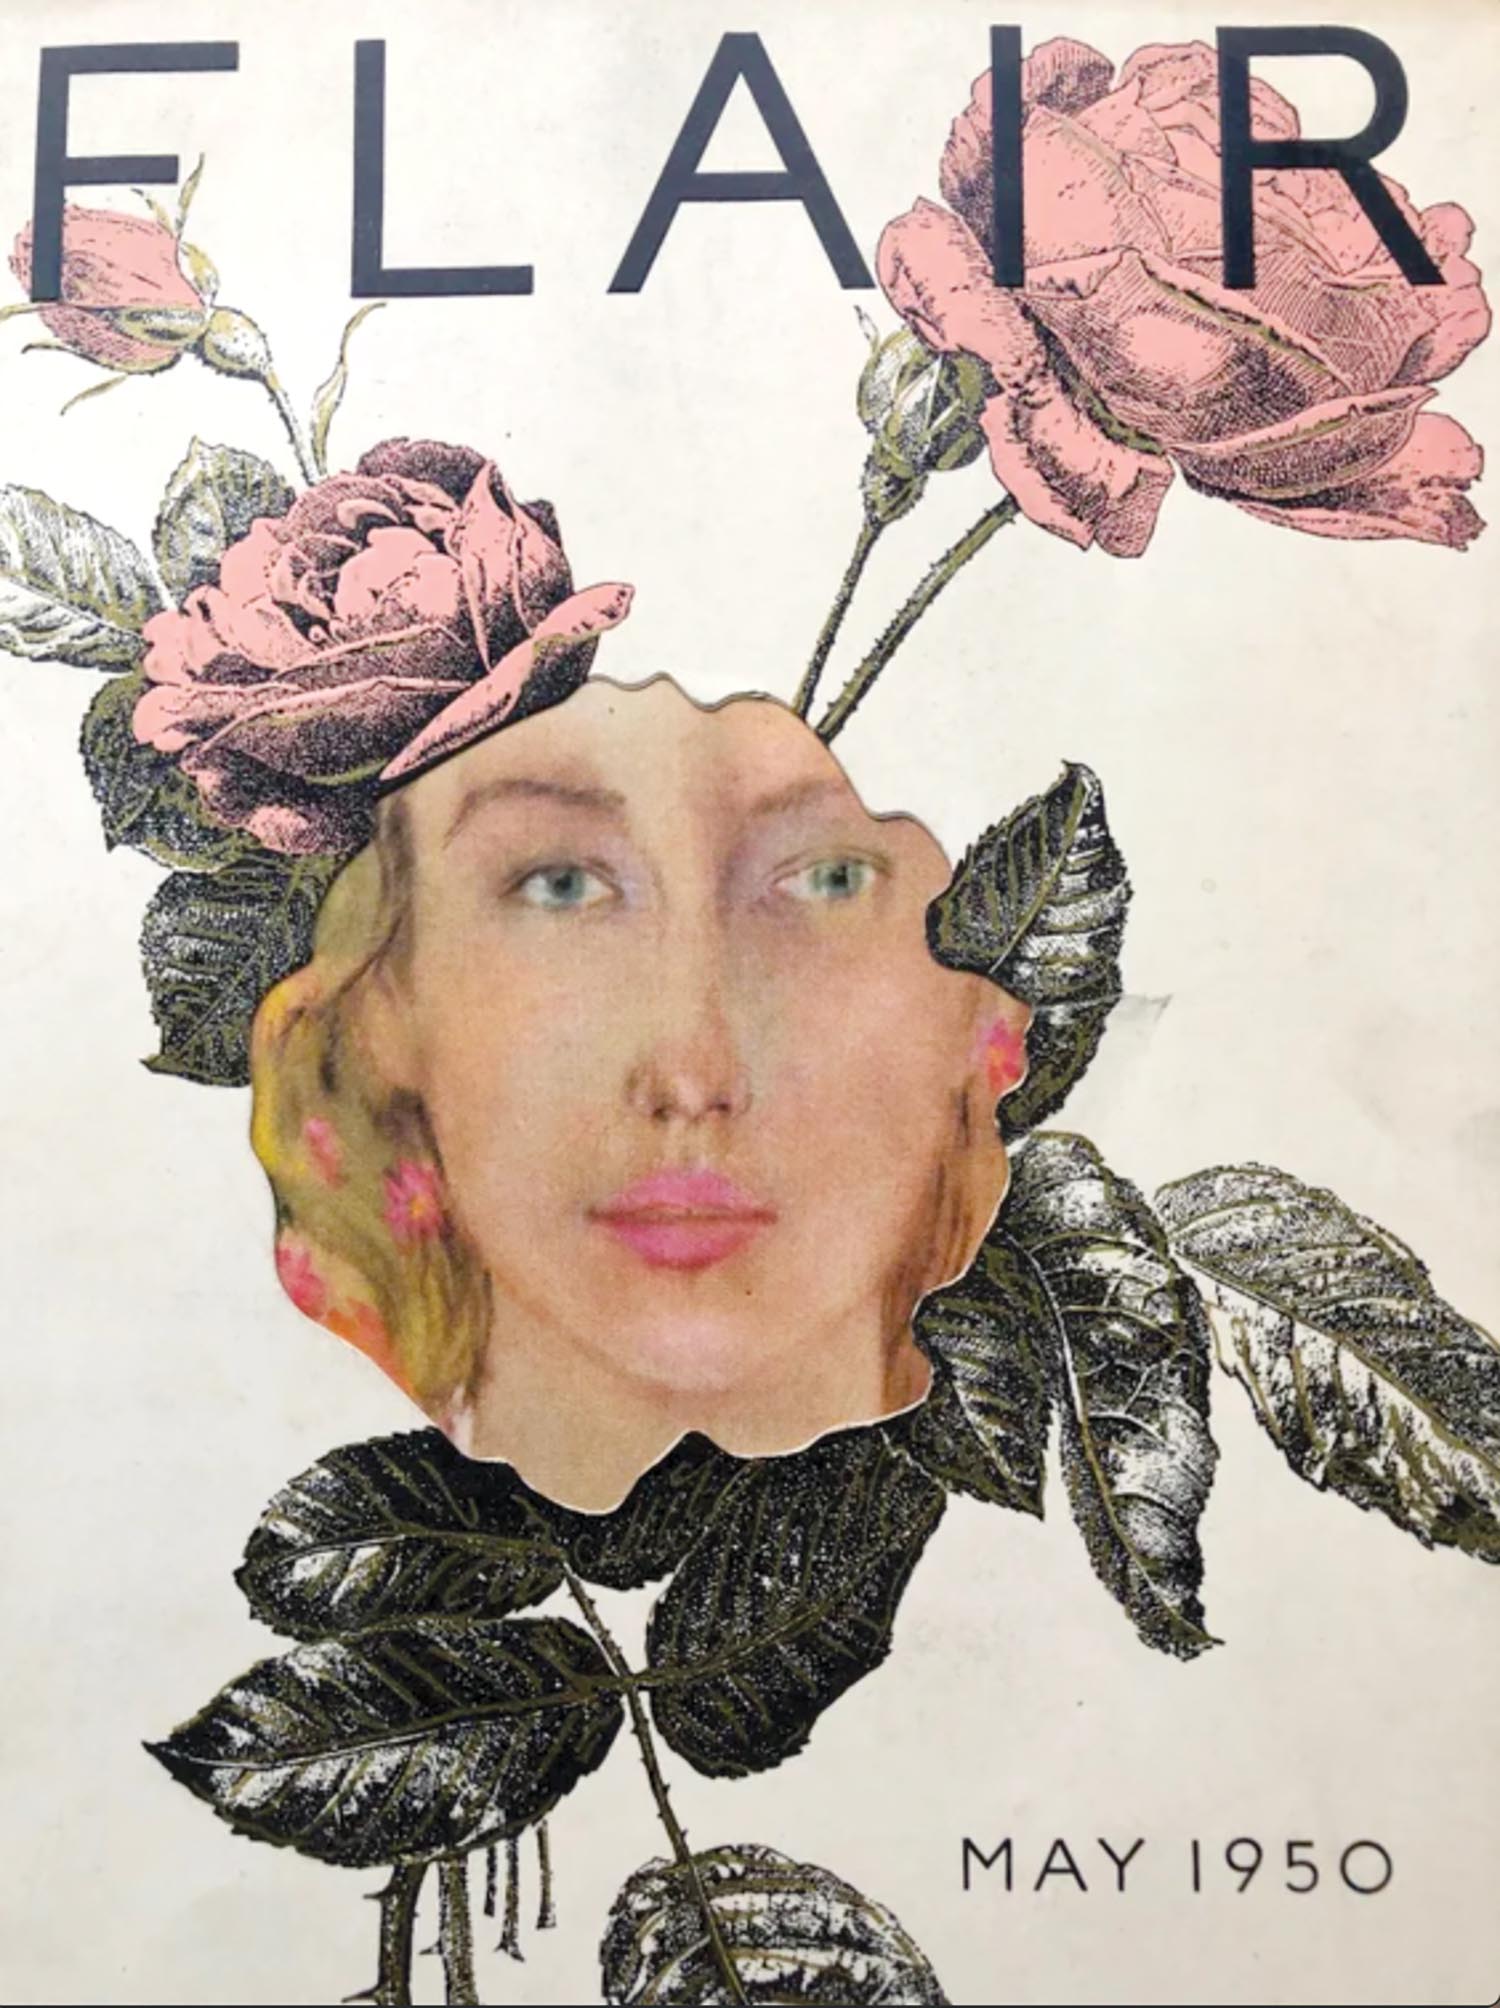 Cover of Flair magazine and flowers and portrait of a blonde woman.